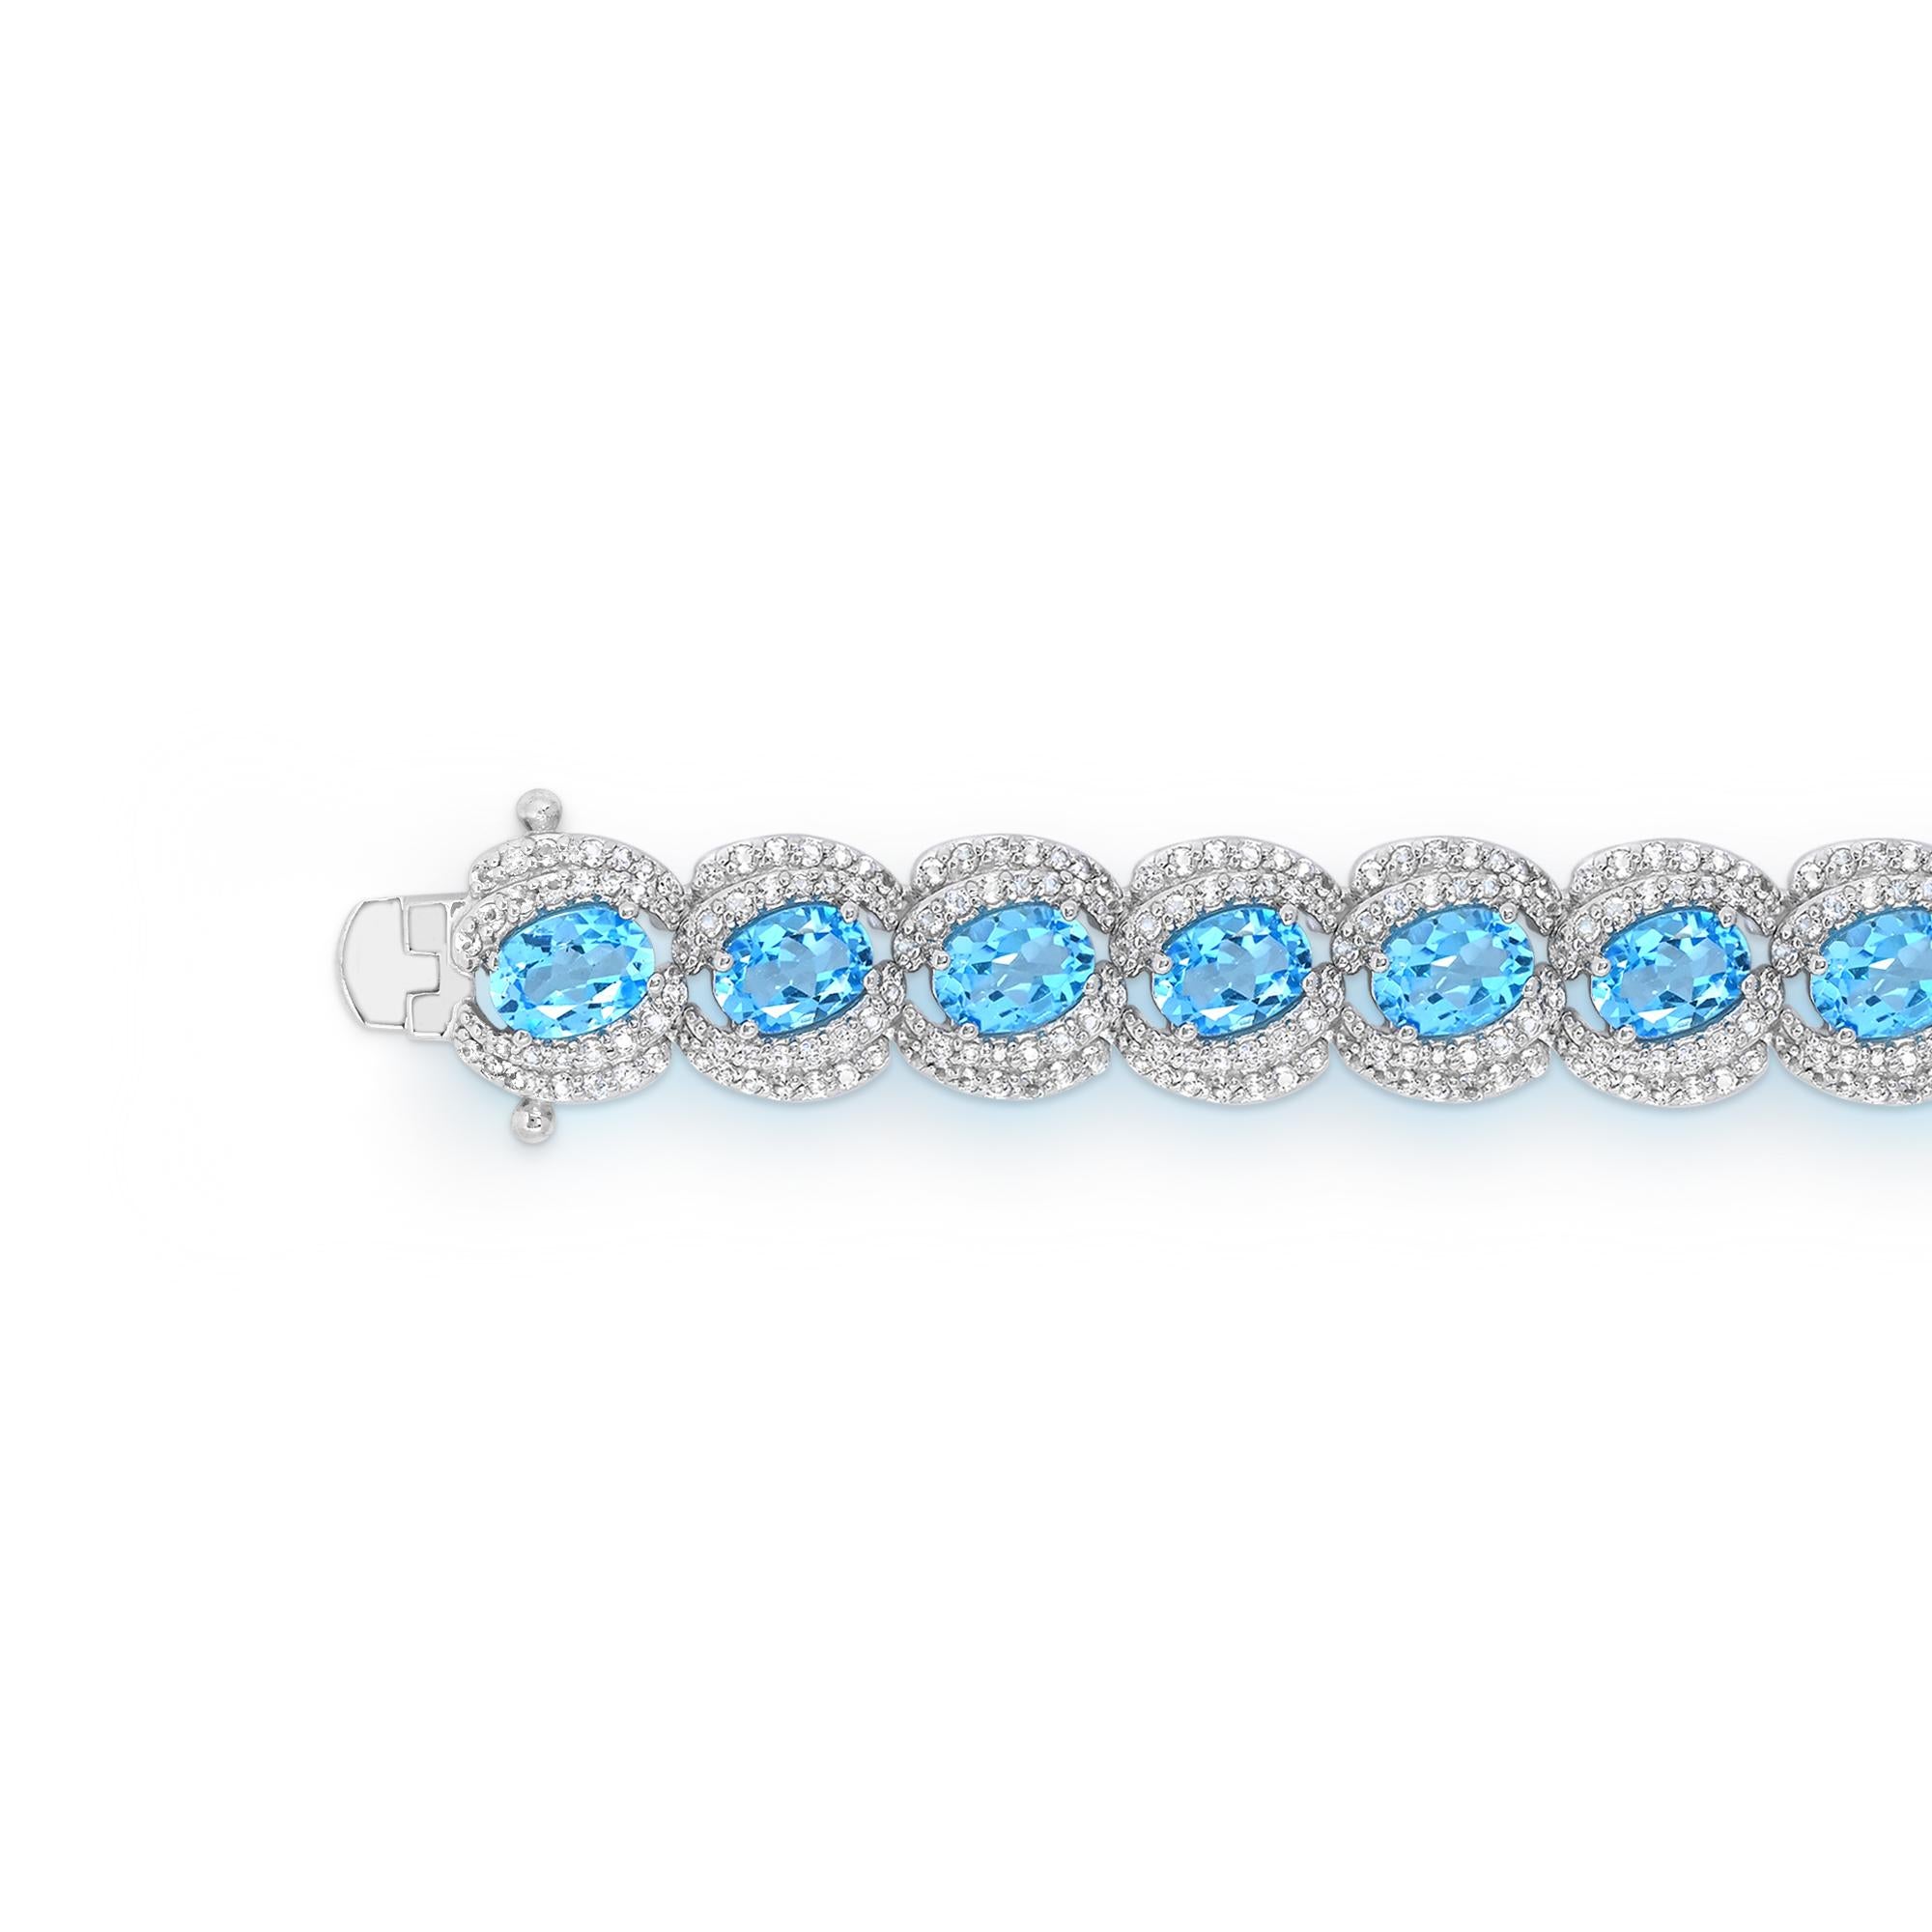 27-1/3 Carat Oval Swiss Blue Topaz and White Topaz Bracelet in Sterling Silver In New Condition For Sale In New York, NY